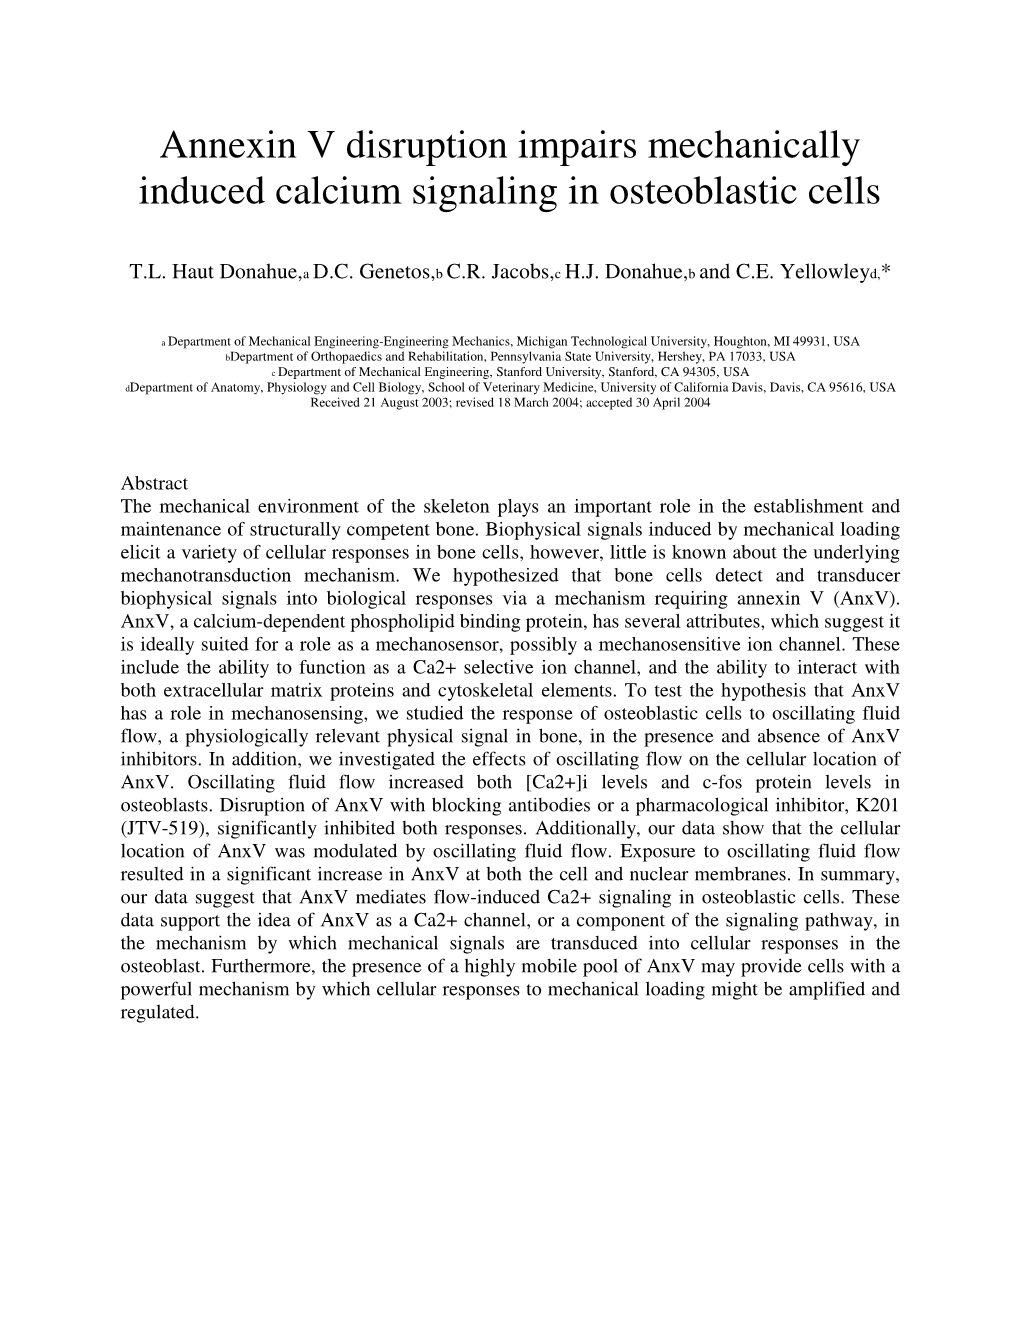 Annexin V Disruption Impairs Mechanically Induced Calcium Signaling in Osteoblastic Cells